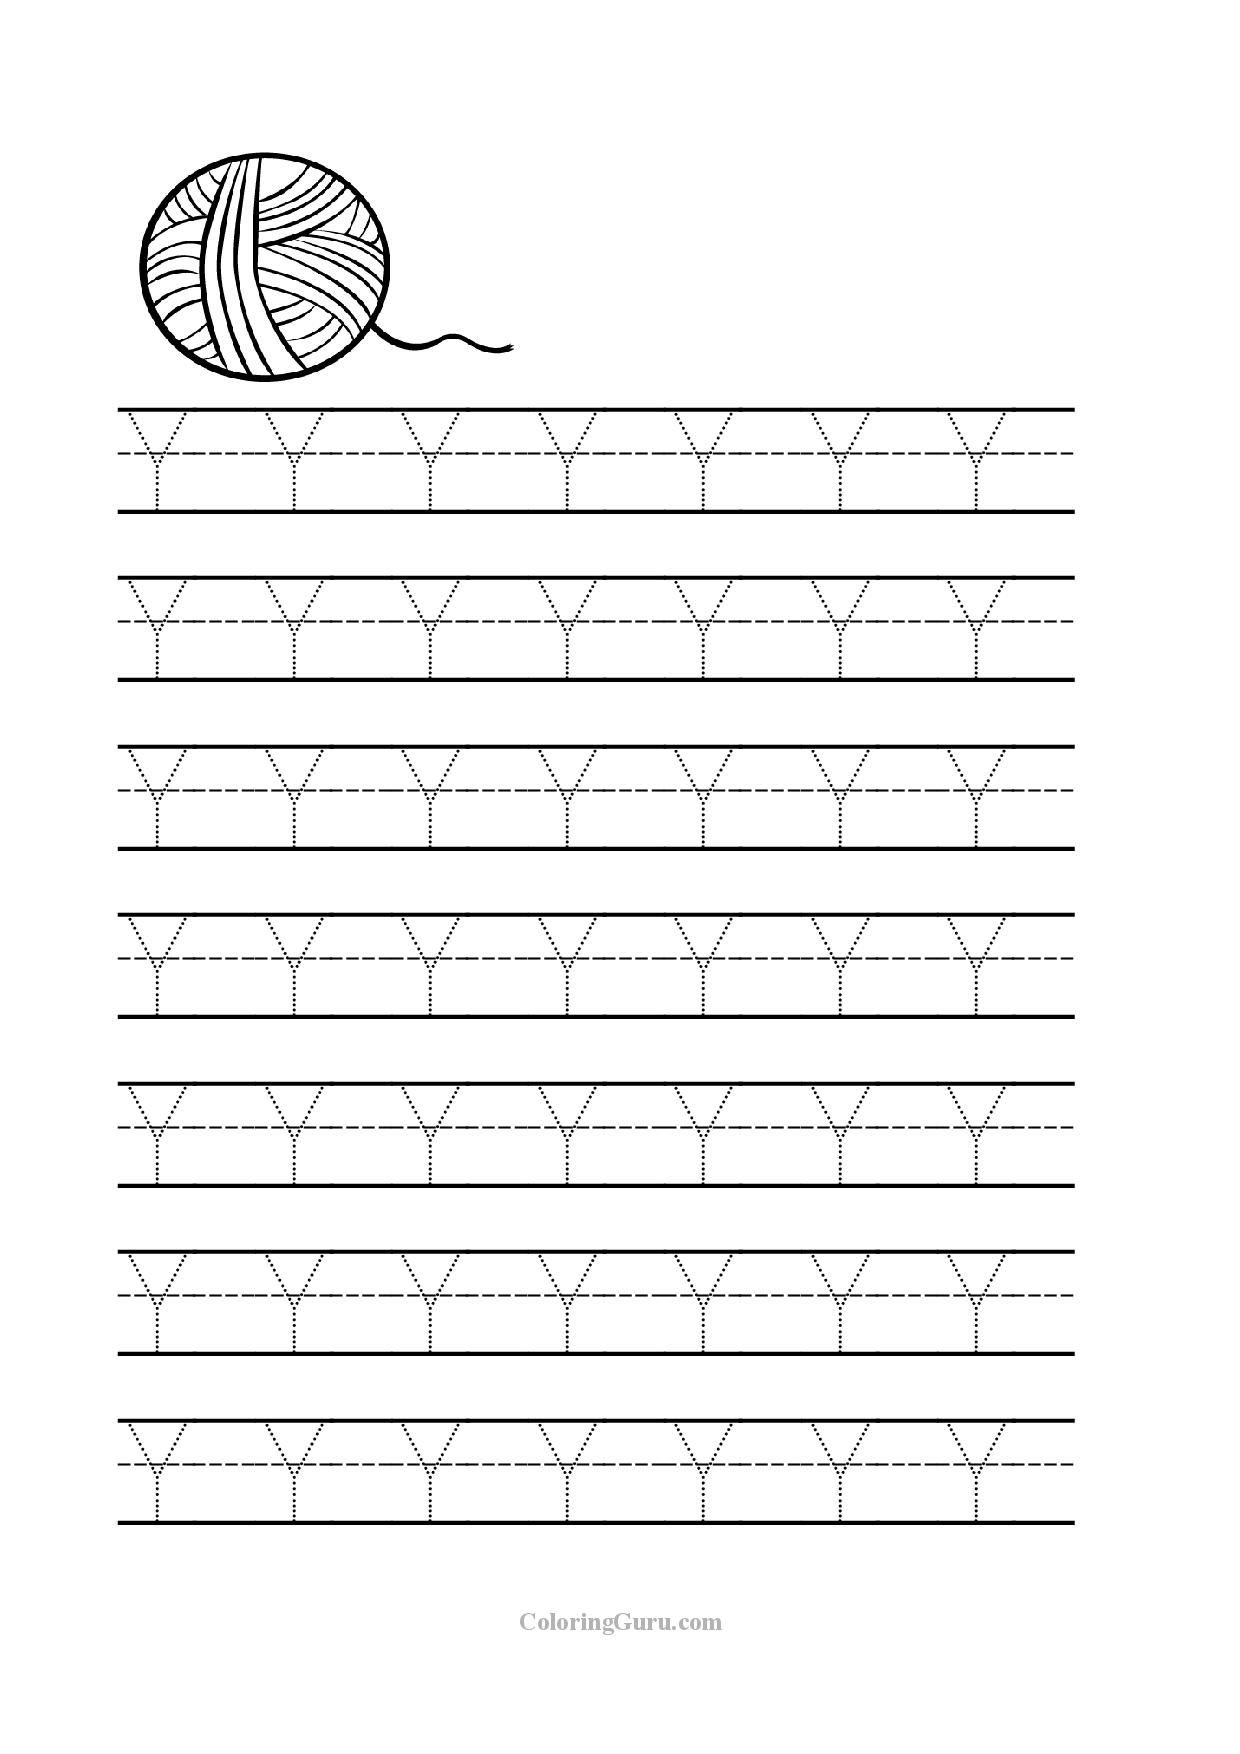 Free Printable Tracing Letter Y Worksheets For Preschool within Letter Y Worksheets Easy Peasy